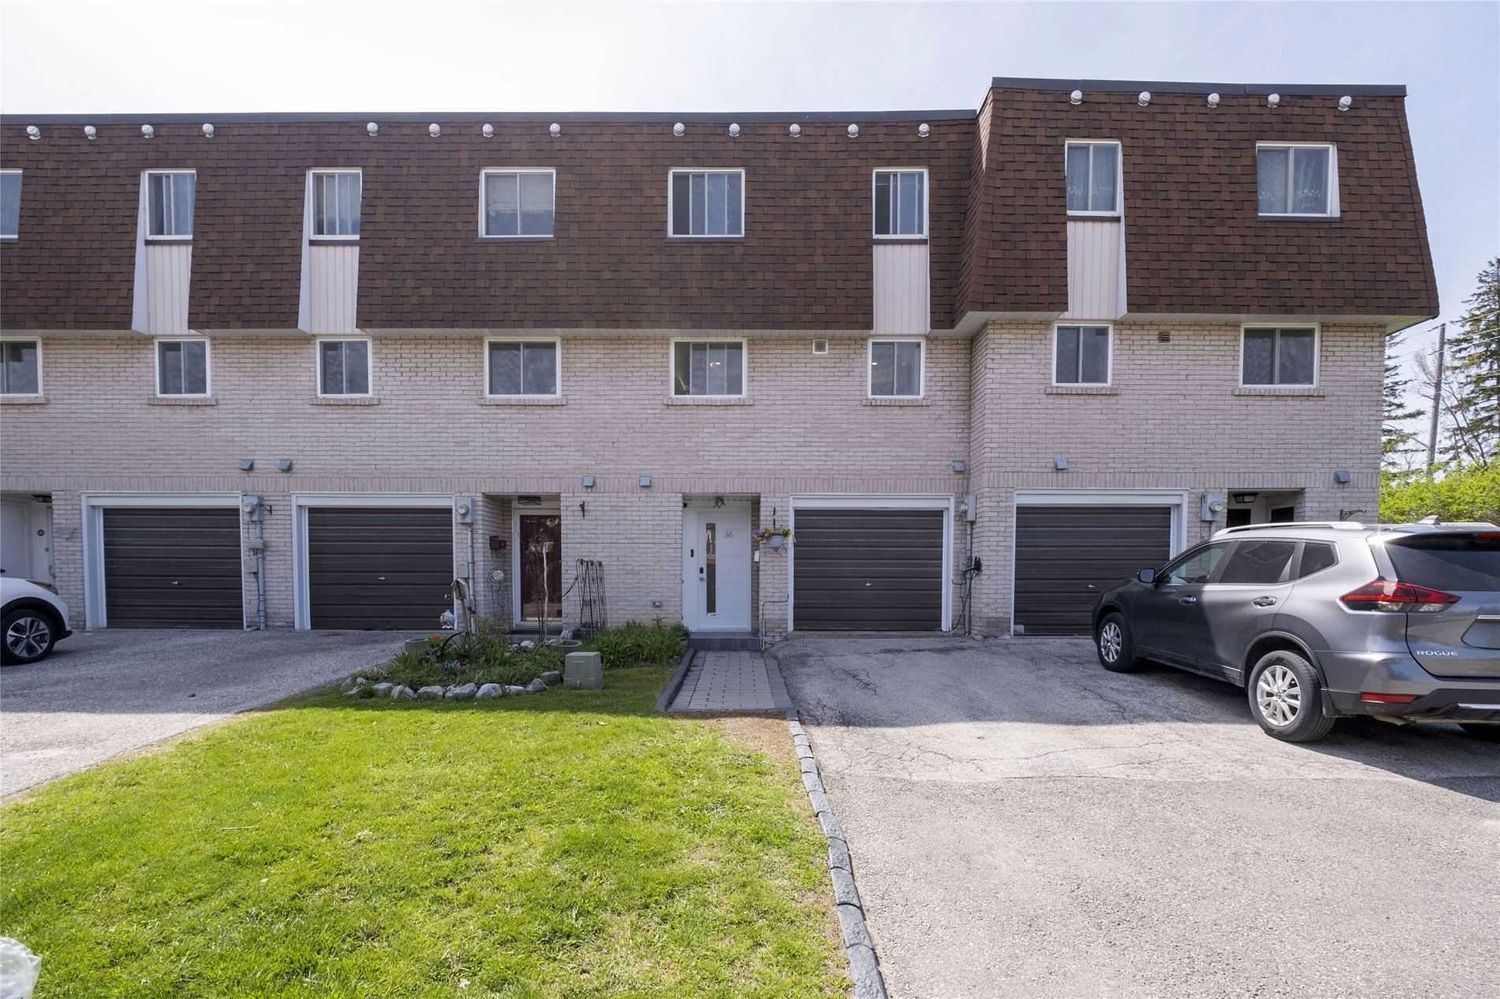 141 Clark Avenue. 141 Clark Avenue Townhomes is located in  Markham, Toronto - image #1 of 2